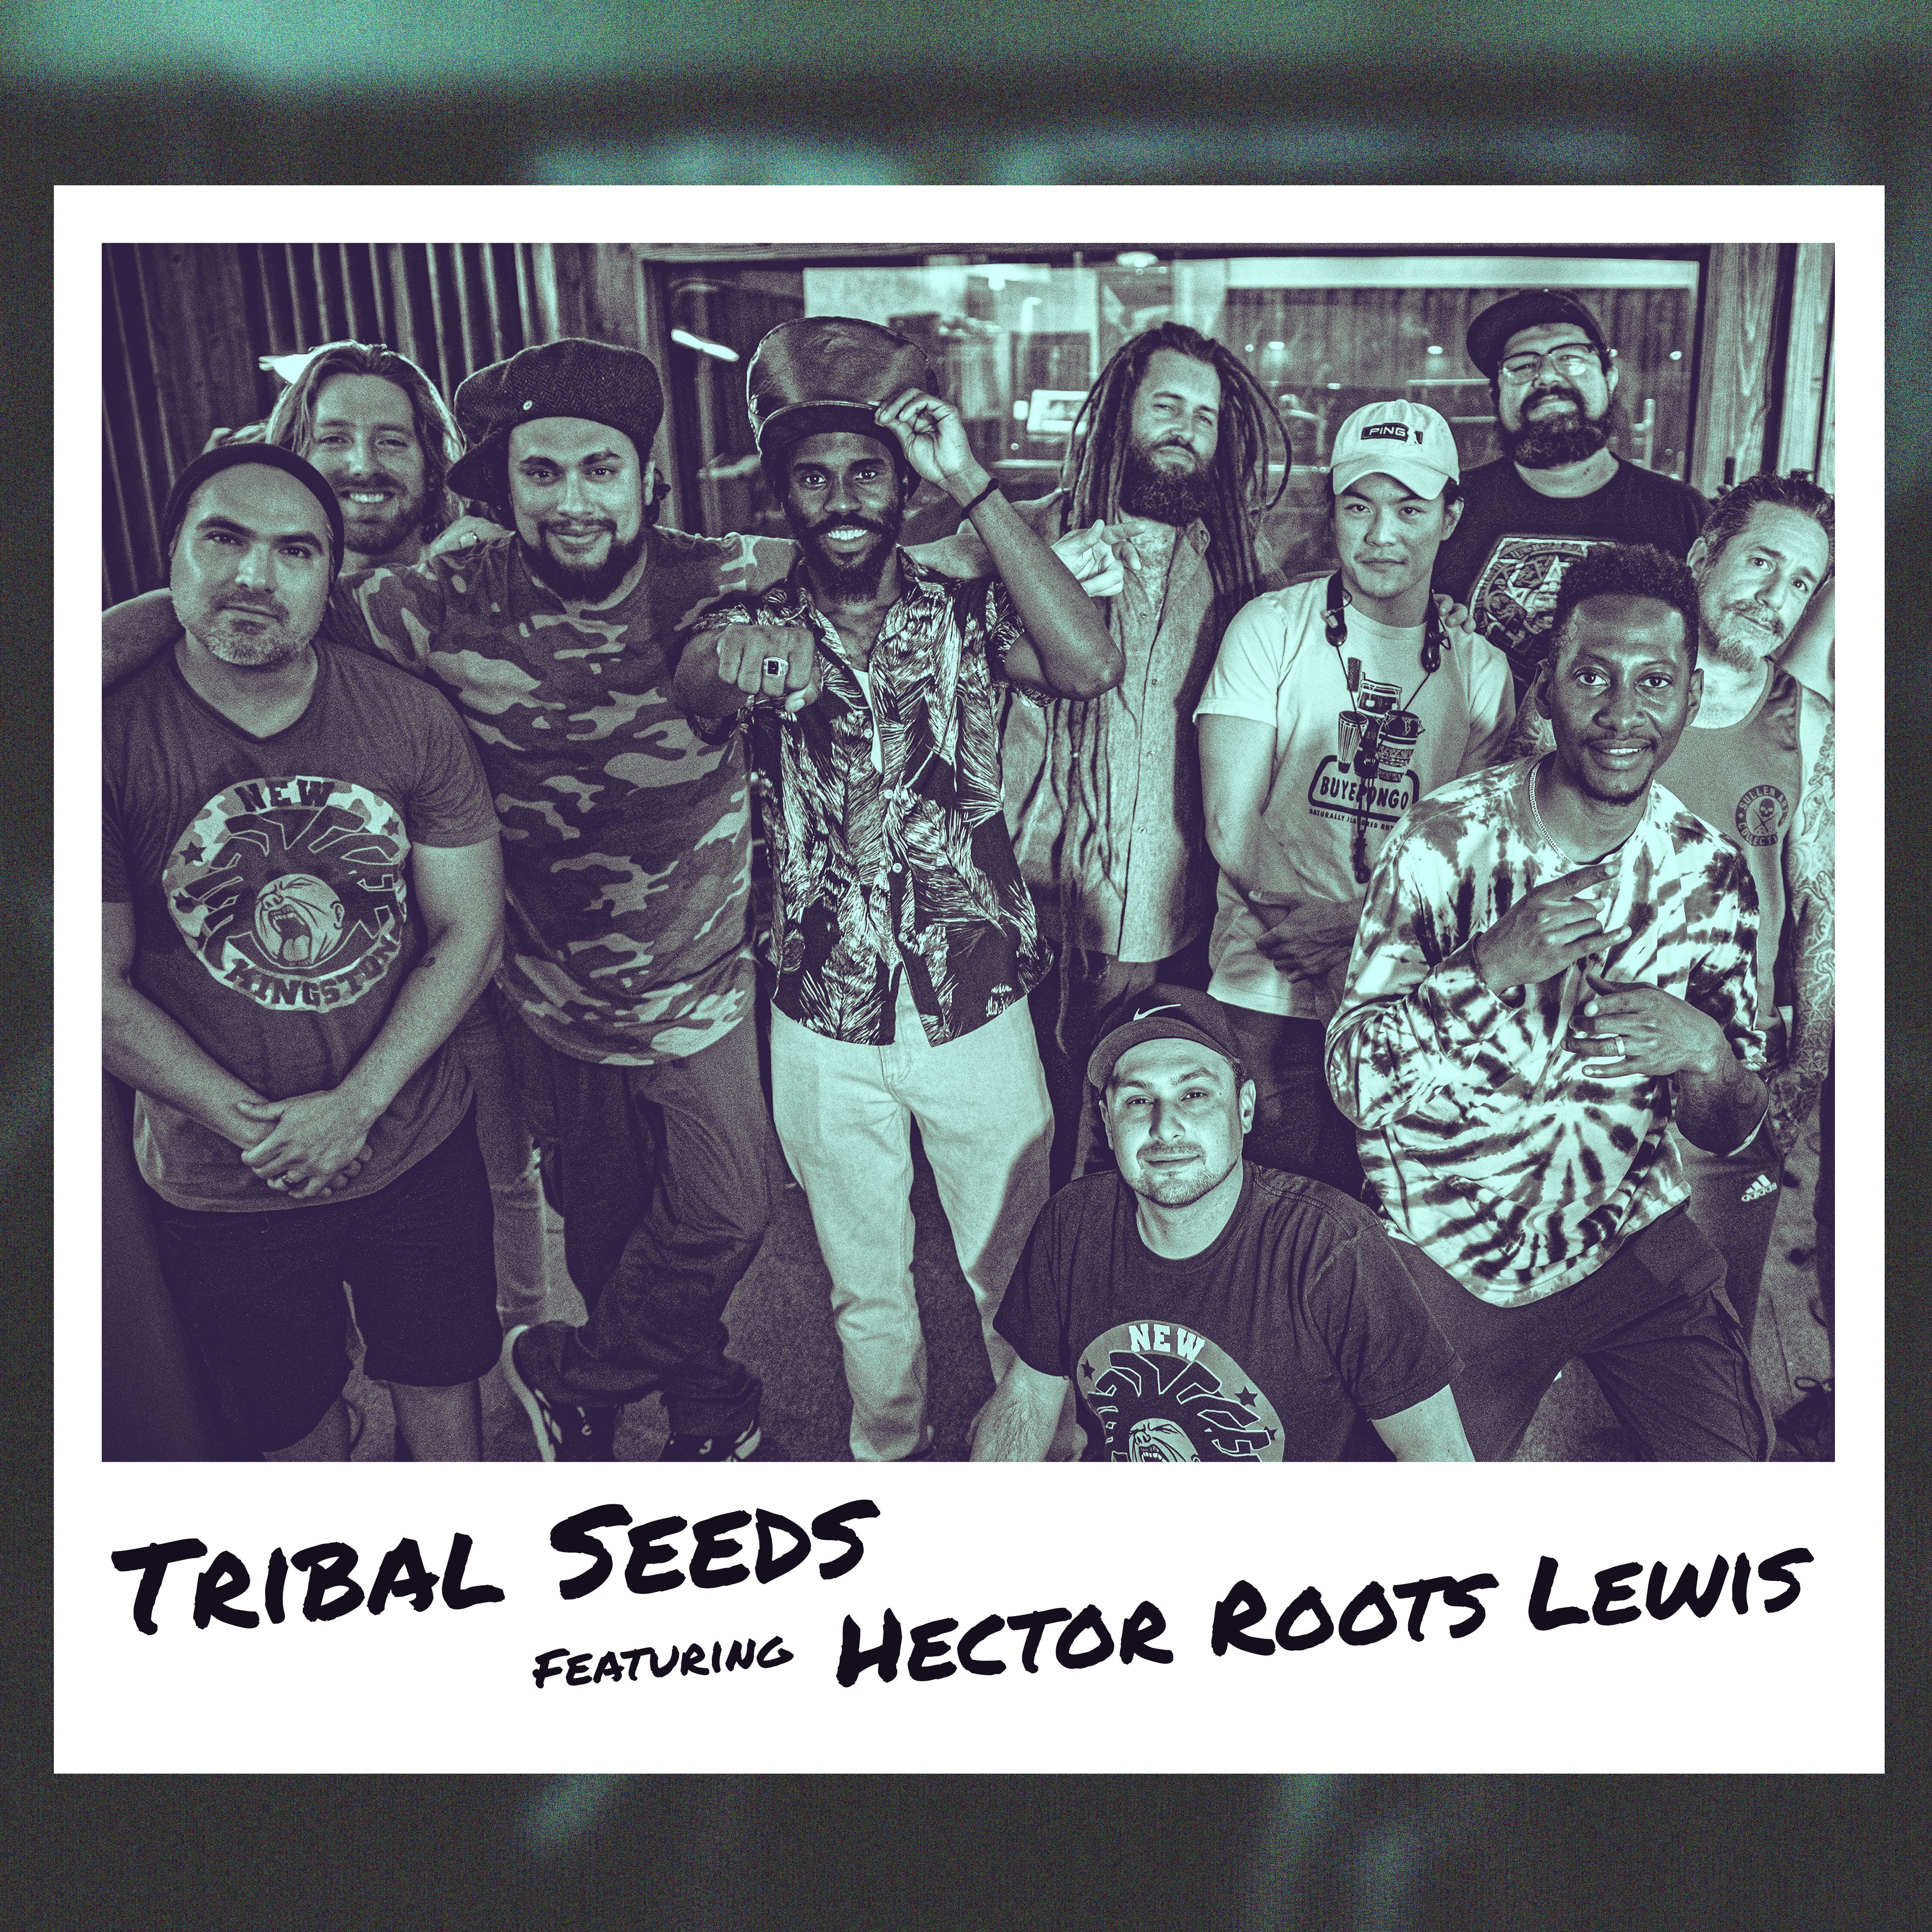 Hector Roots Lewis joins Reggae Band Tribal Seeds as Lead Vocalist for Summer Tour